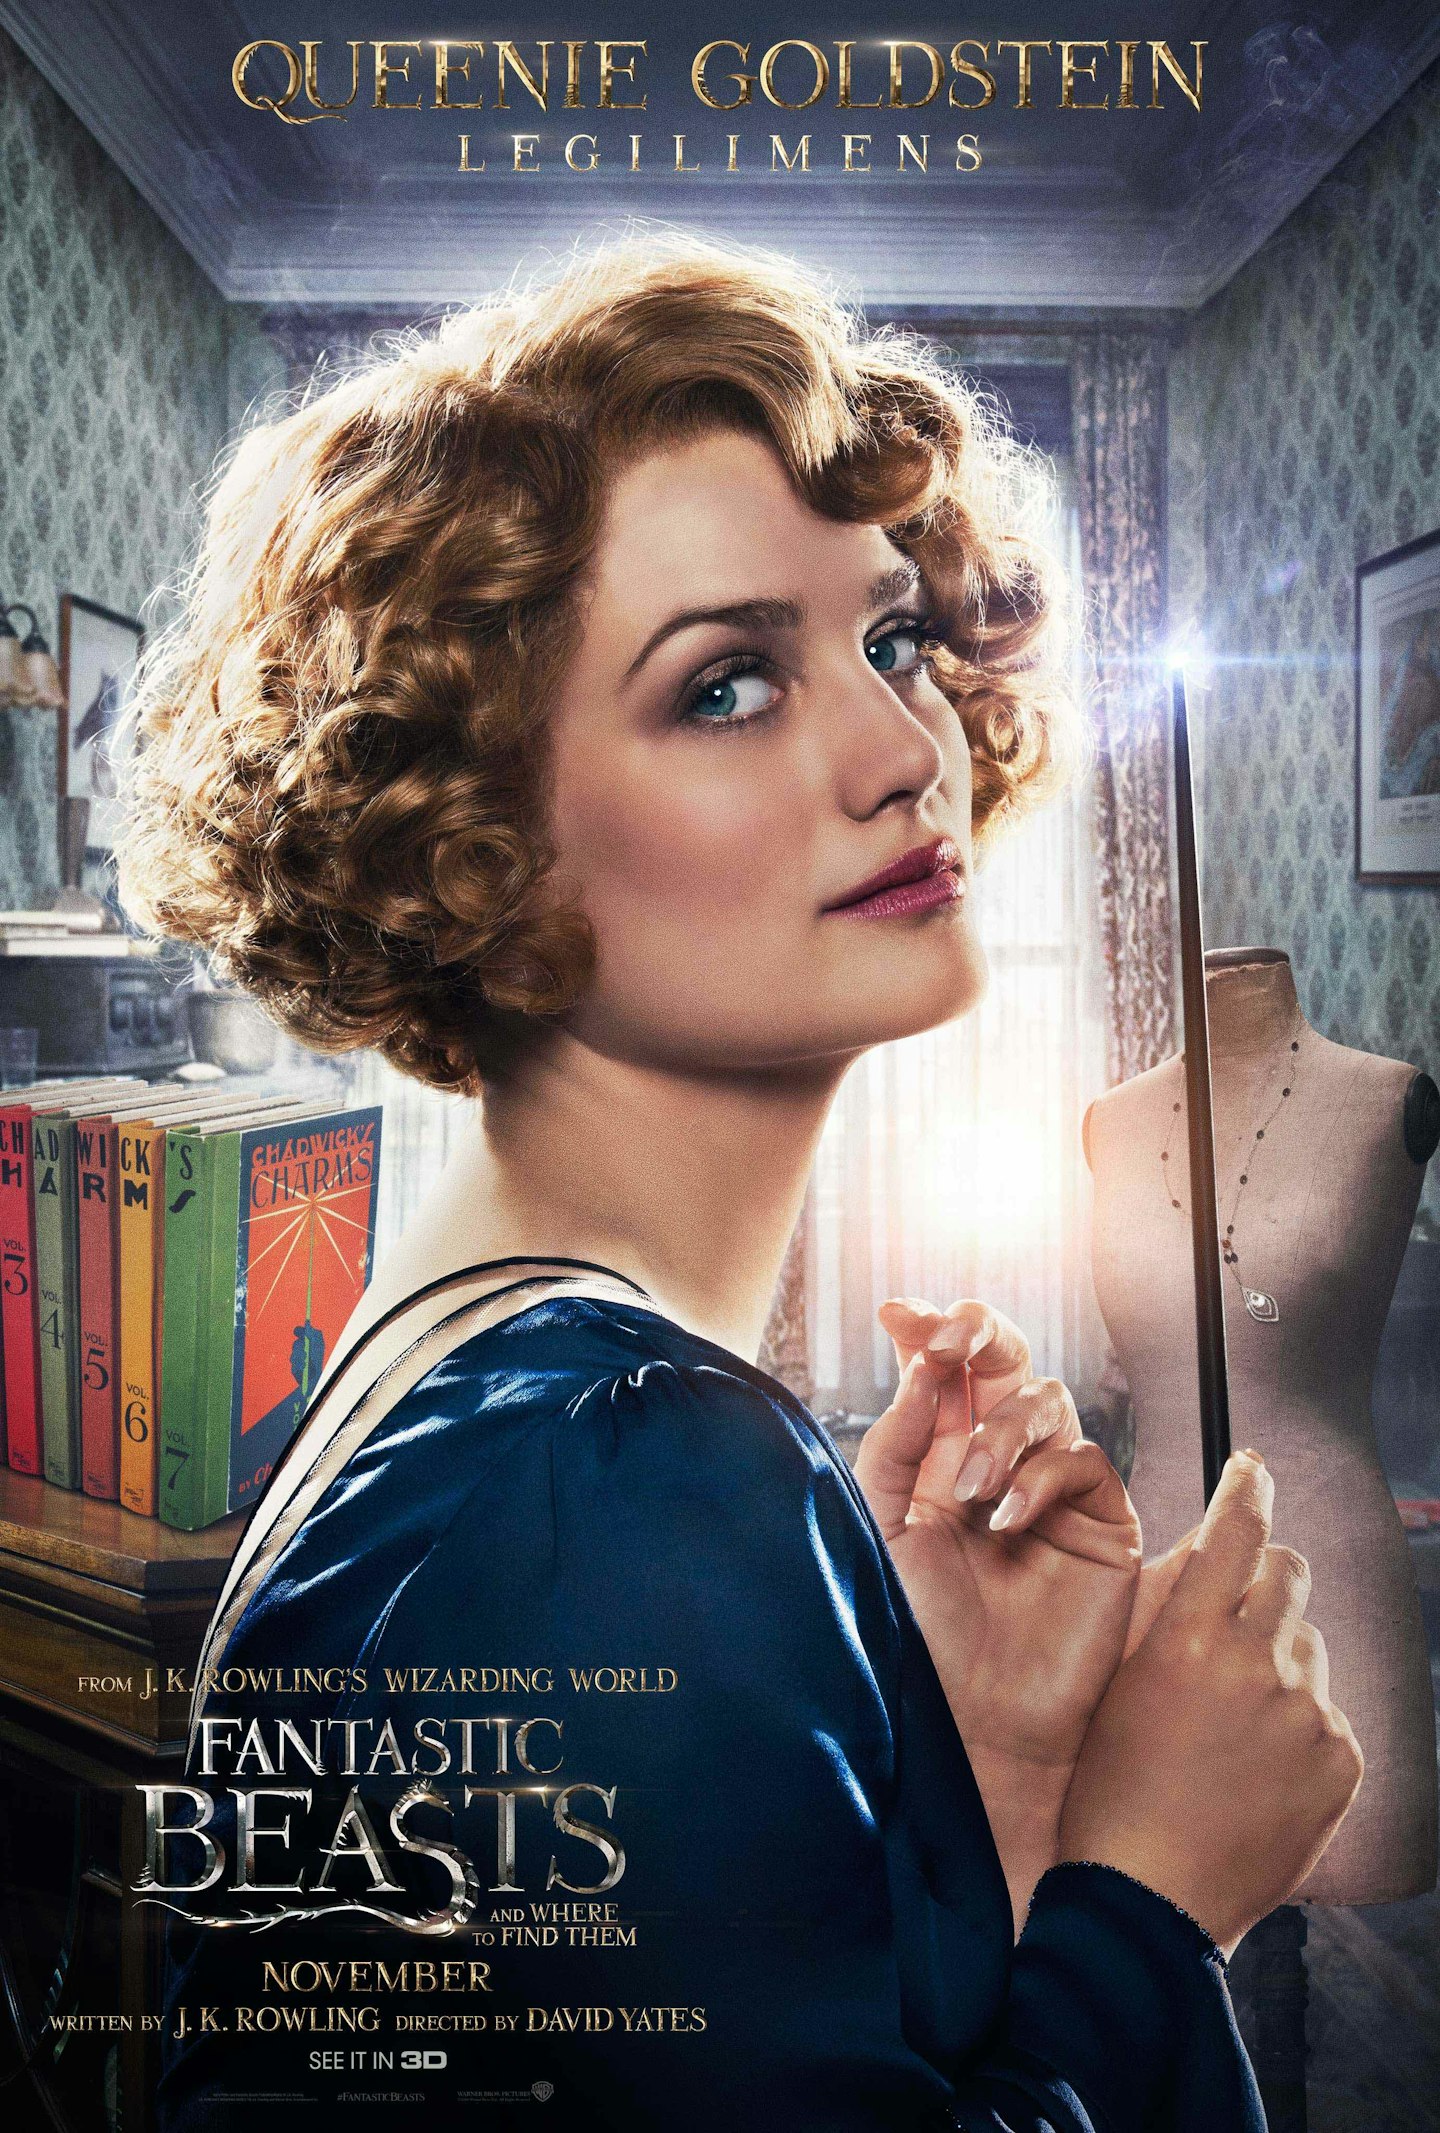 Fantastic Beasts And Where To Find Them character posters